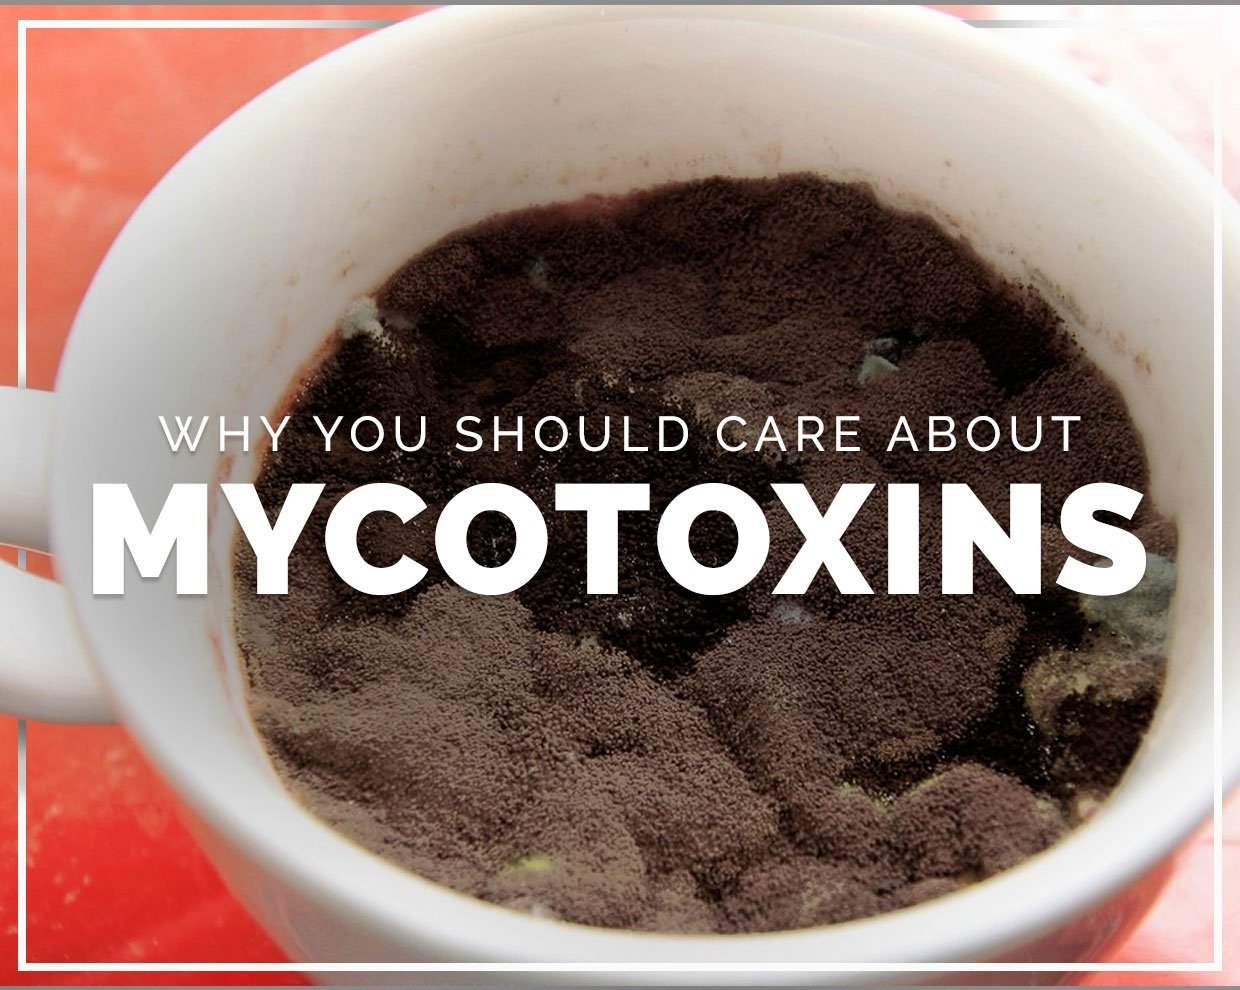 Why you should care about mycotoxins